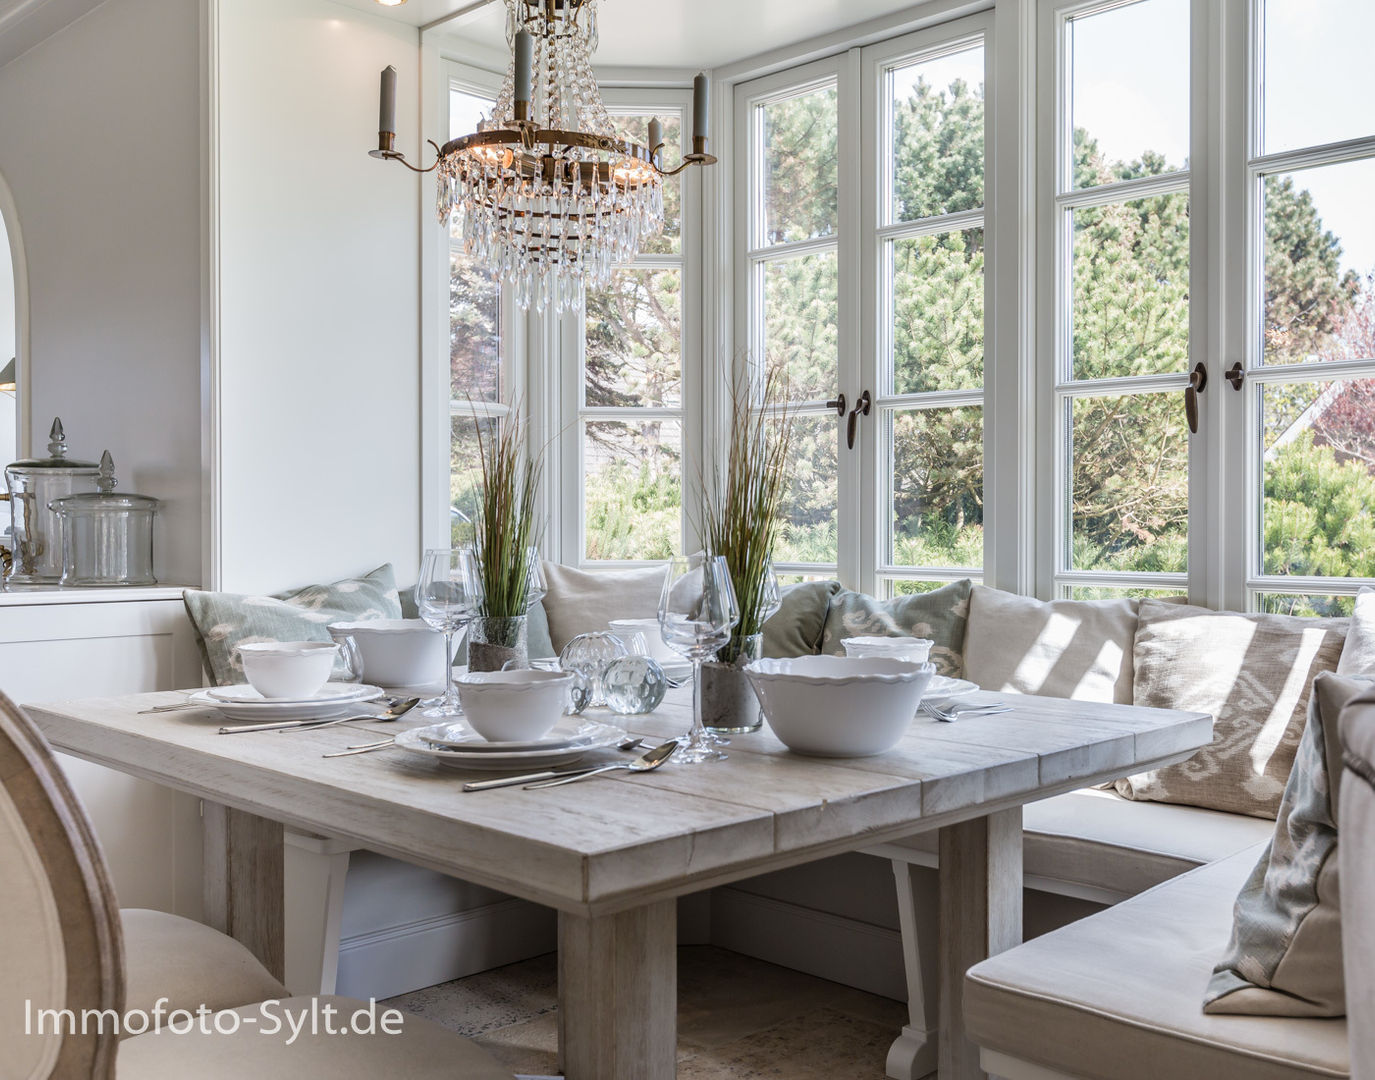 Reetdachhaus in List auf Sylt, Immofoto-Sylt Immofoto-Sylt Country style dining room